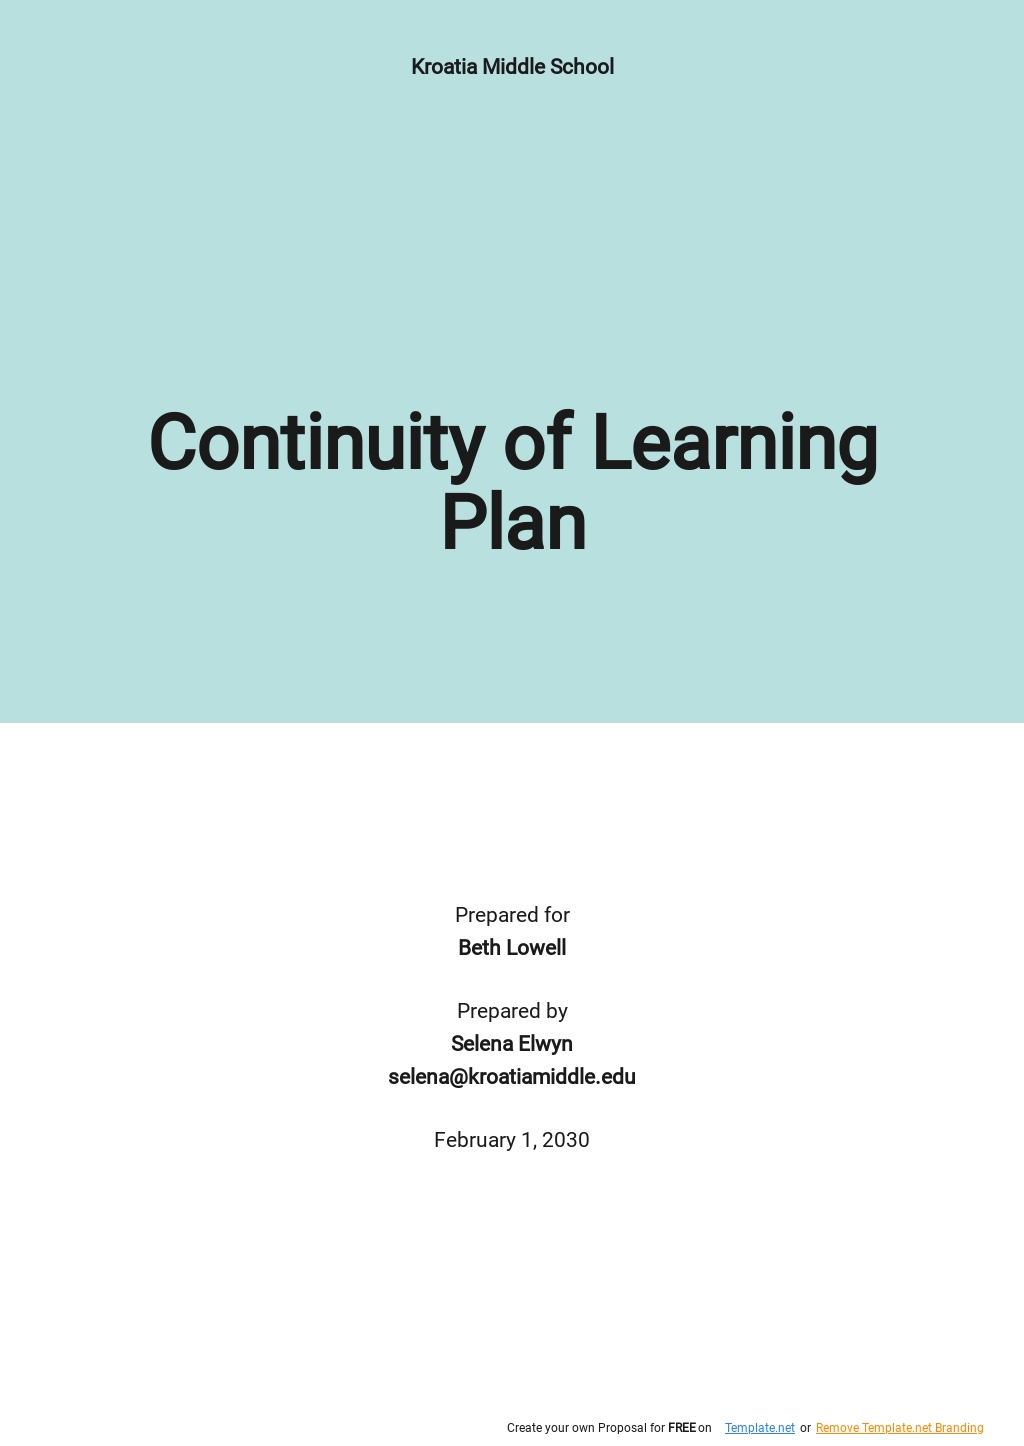 Continuity of Learning Plan Template.jpe